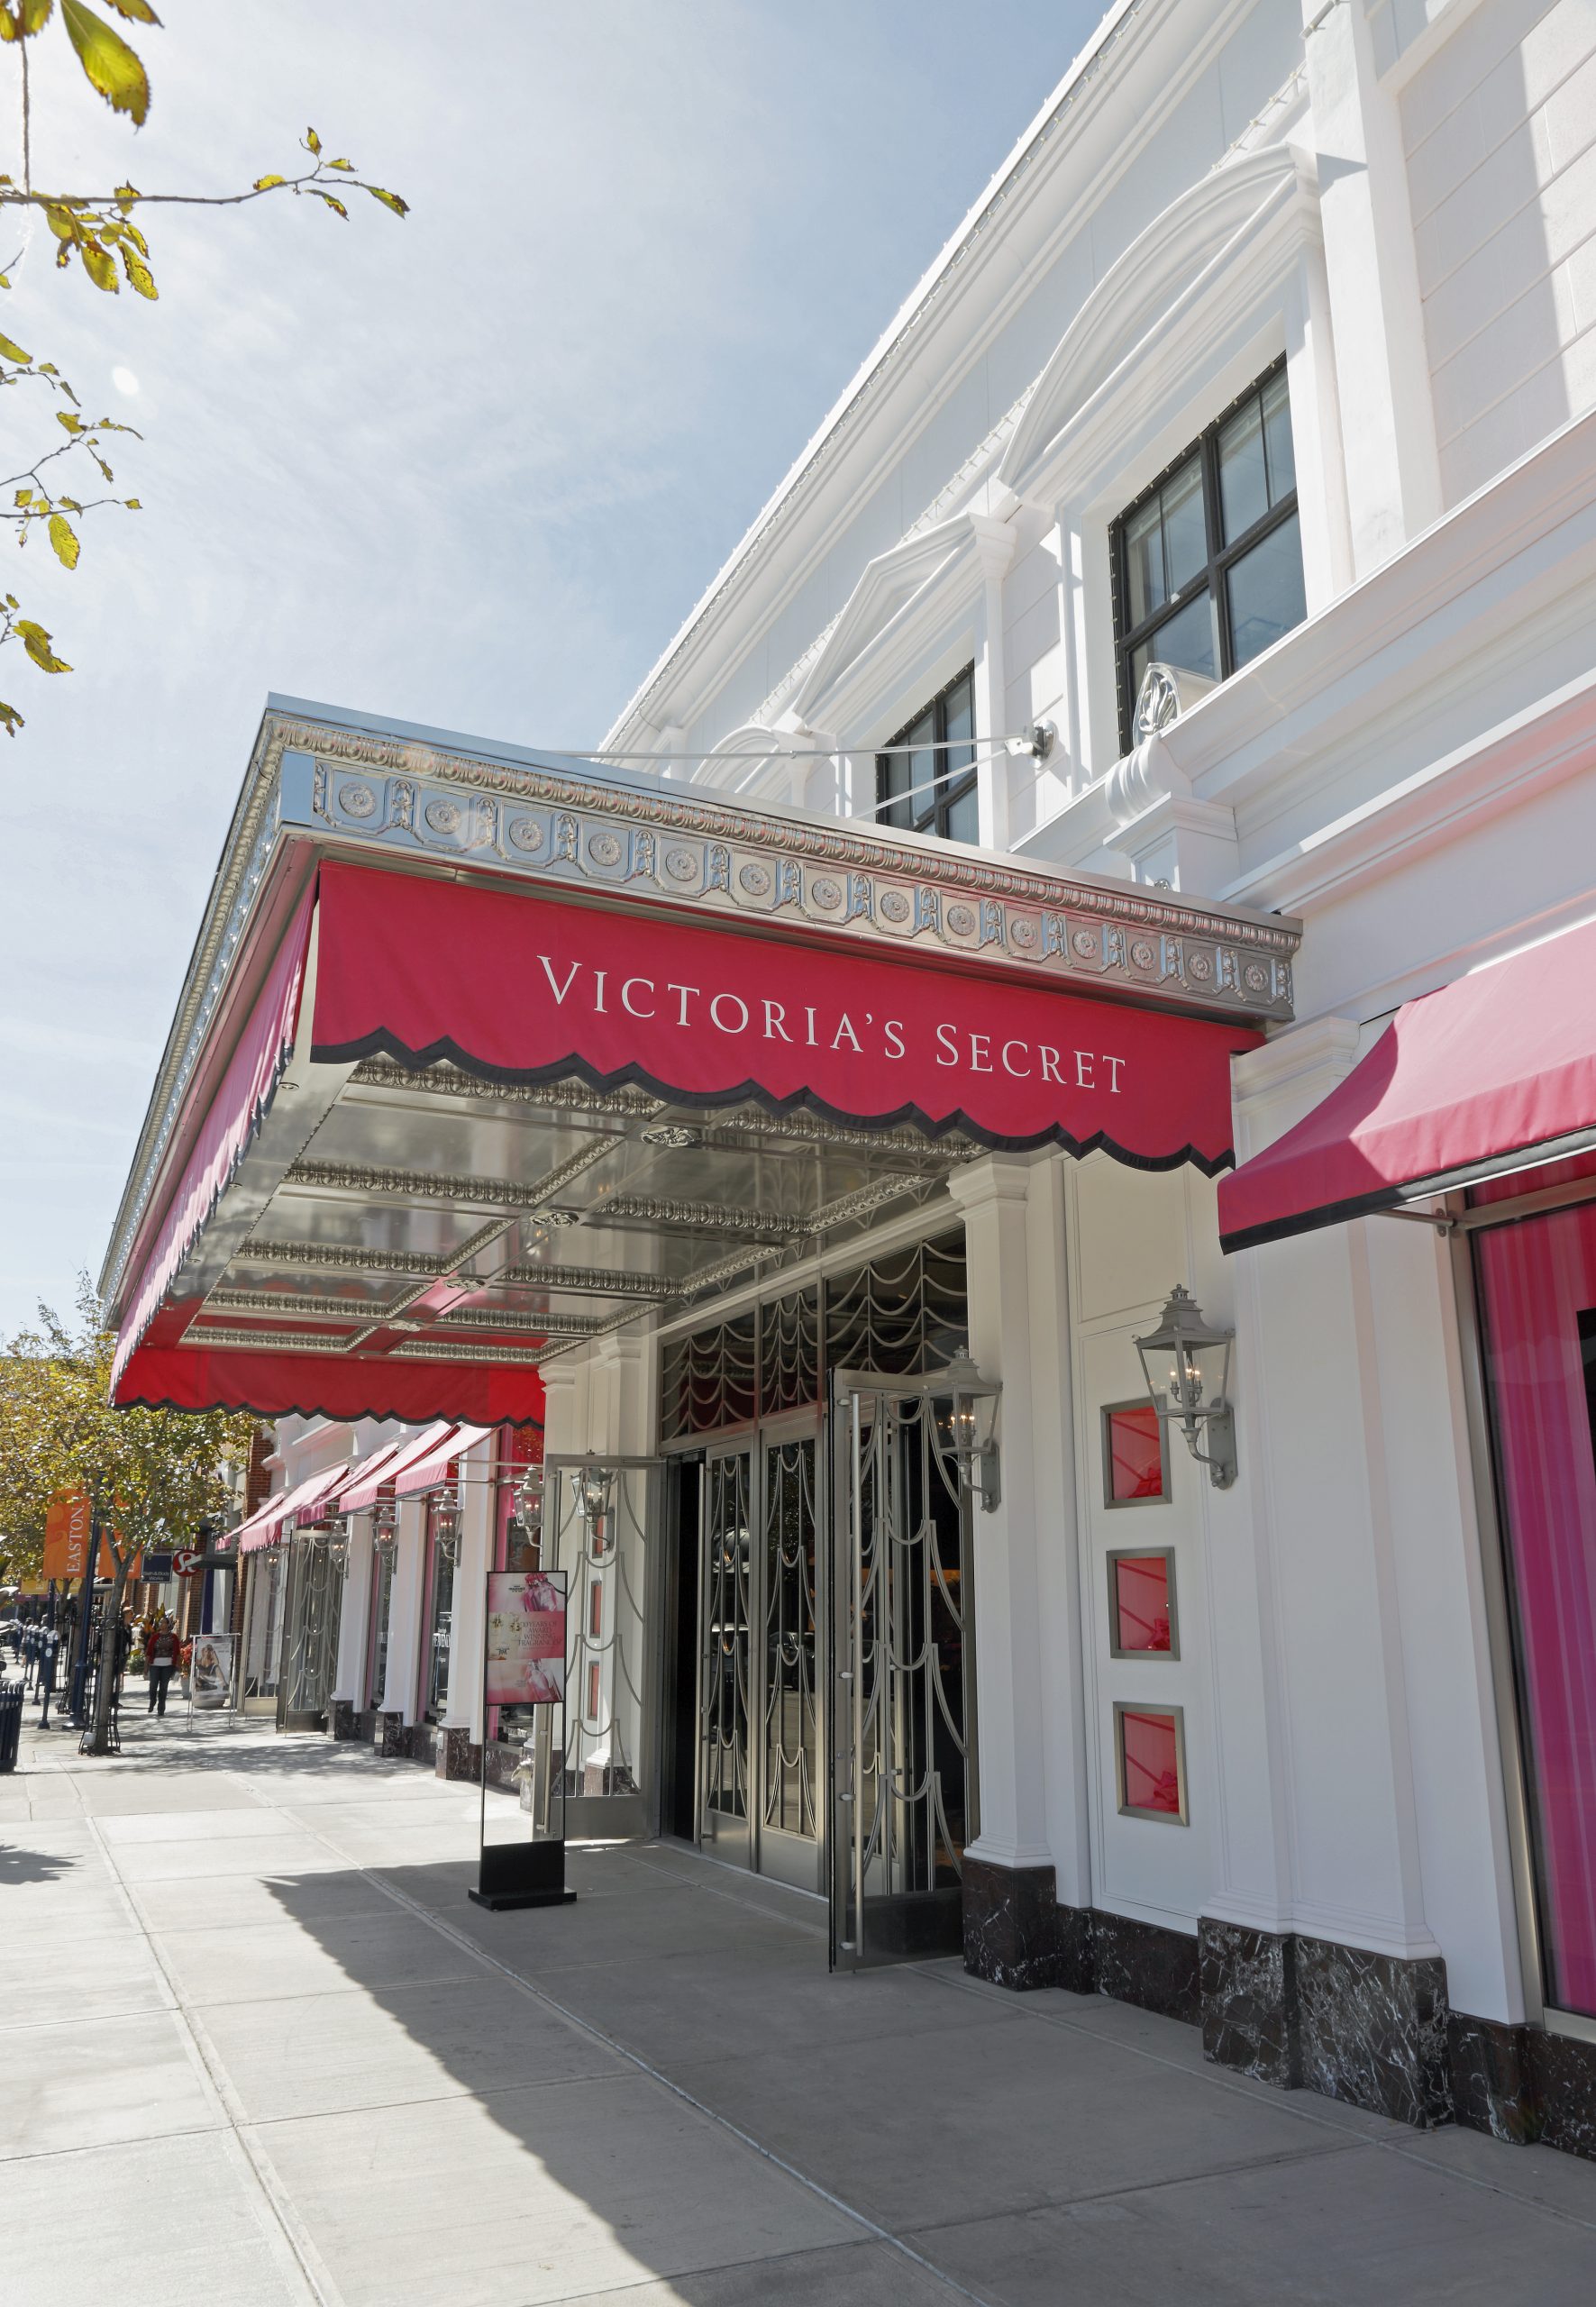 Victoria's Secret to buy online startup Adore Me for $400 million